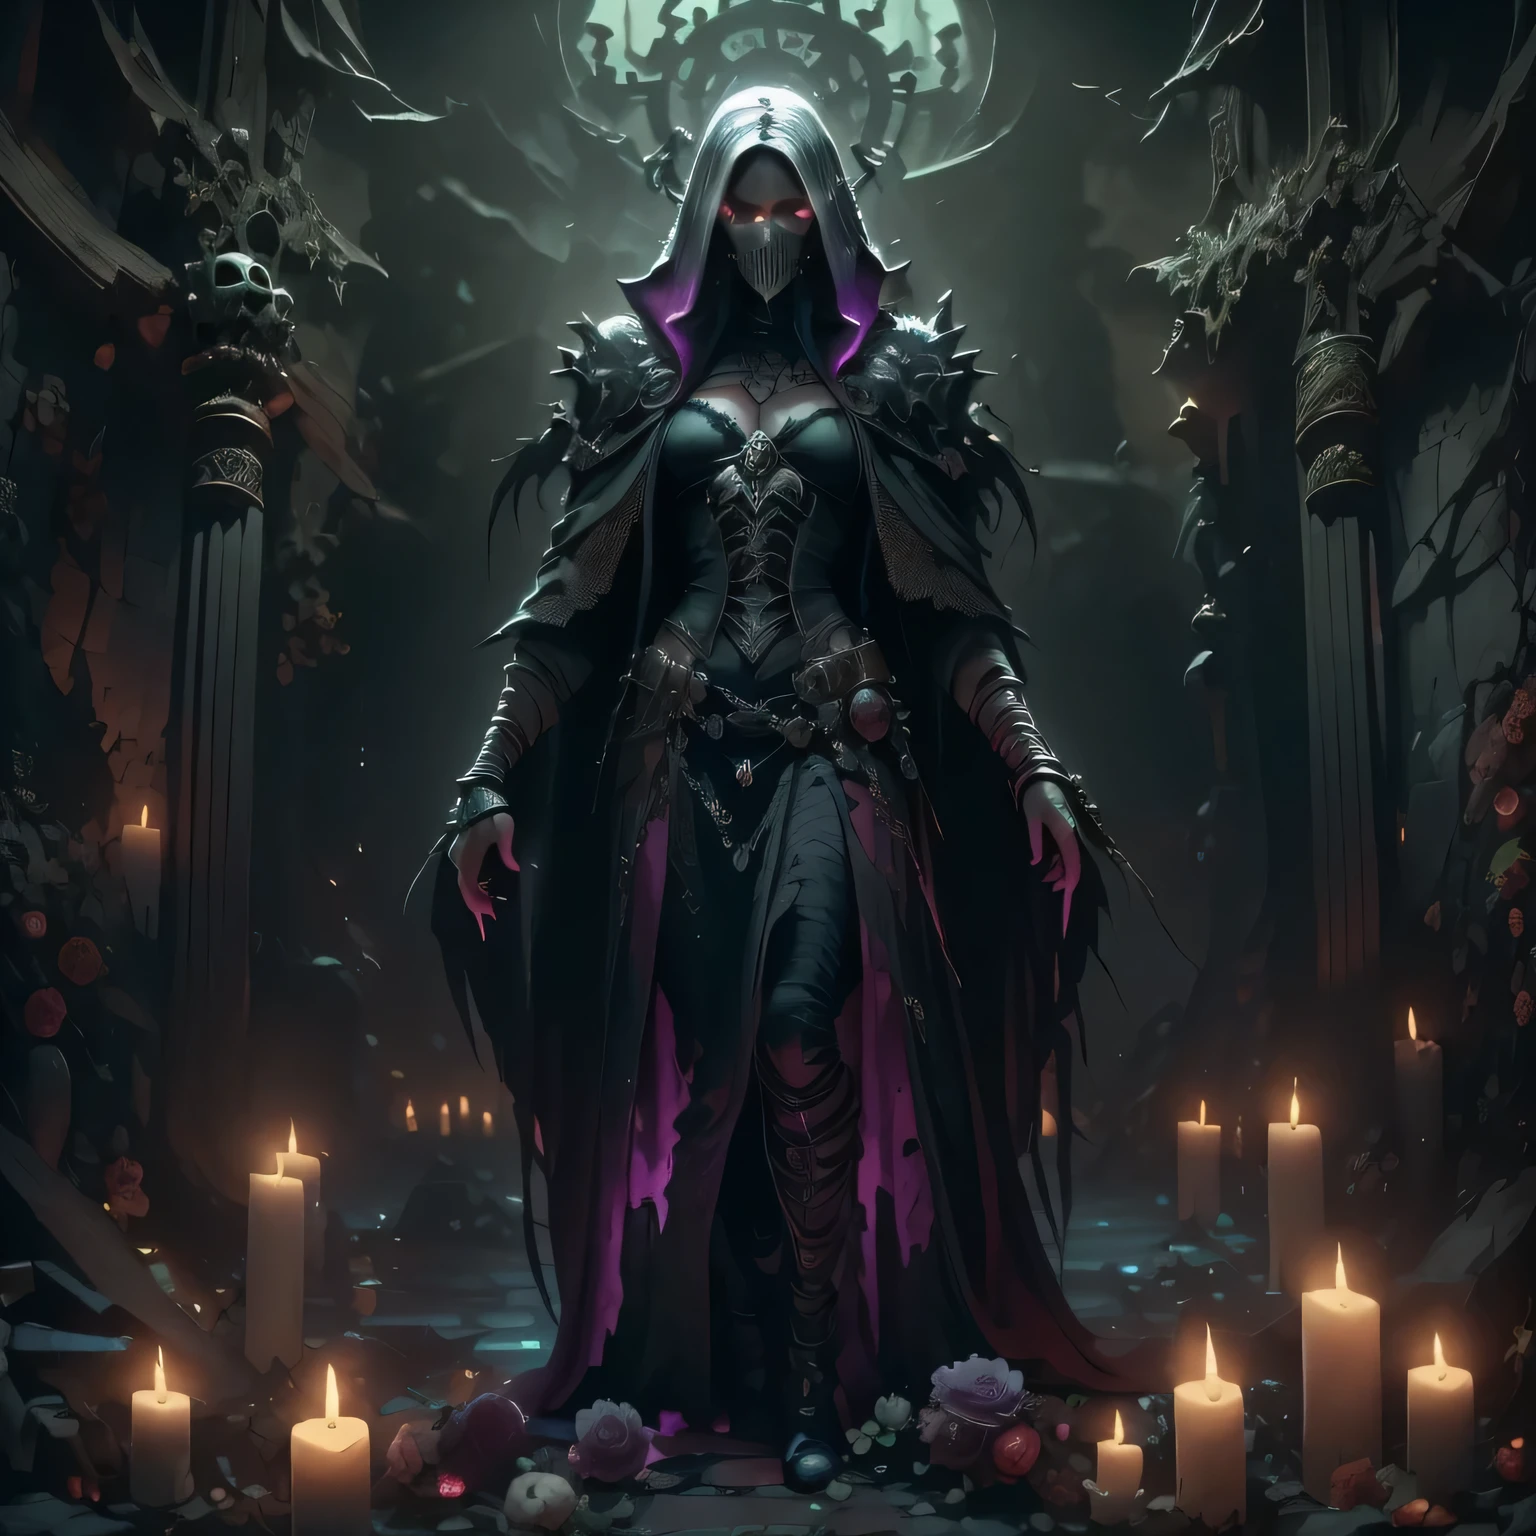 Generate an 8k image of a necromancer standing in the center of a dark and foreboding location. His face is ultra detailed, the necromancer's eyes must have a completely white iris, level of detail 1.2. Your face should display a mixture of sensuality and demonic expression. The necromancer's skin should be pale and dead, contrasting with the dark environment. Surrounding the necromancer is a shadowy landscape of rotting, dismembered bodies rising from the earth, souls of the dead, and candles illuminating the symbols of dark magic, detail level 1.2. The atmosphere must be charged with dark magic, causing visual distortions and creating a frightening and sinister scene, level of detail 1.2. The final image must be created in CGI and Unreal Engine, with a soft focus effect. The image should not be based on a specific photograph, but should look realistic. The image composition should evoke a sense of technology and high-quality craftsmanship, reminiscent of a masterpiece of illustration and CG art. The composition must include elements of unity, wallpaper and official art. The final image must present fine details, extreme delicacy and beauty, with sharp focus and a high level of detail. The construction of the image must be procedural, based only on the information provided in this text.